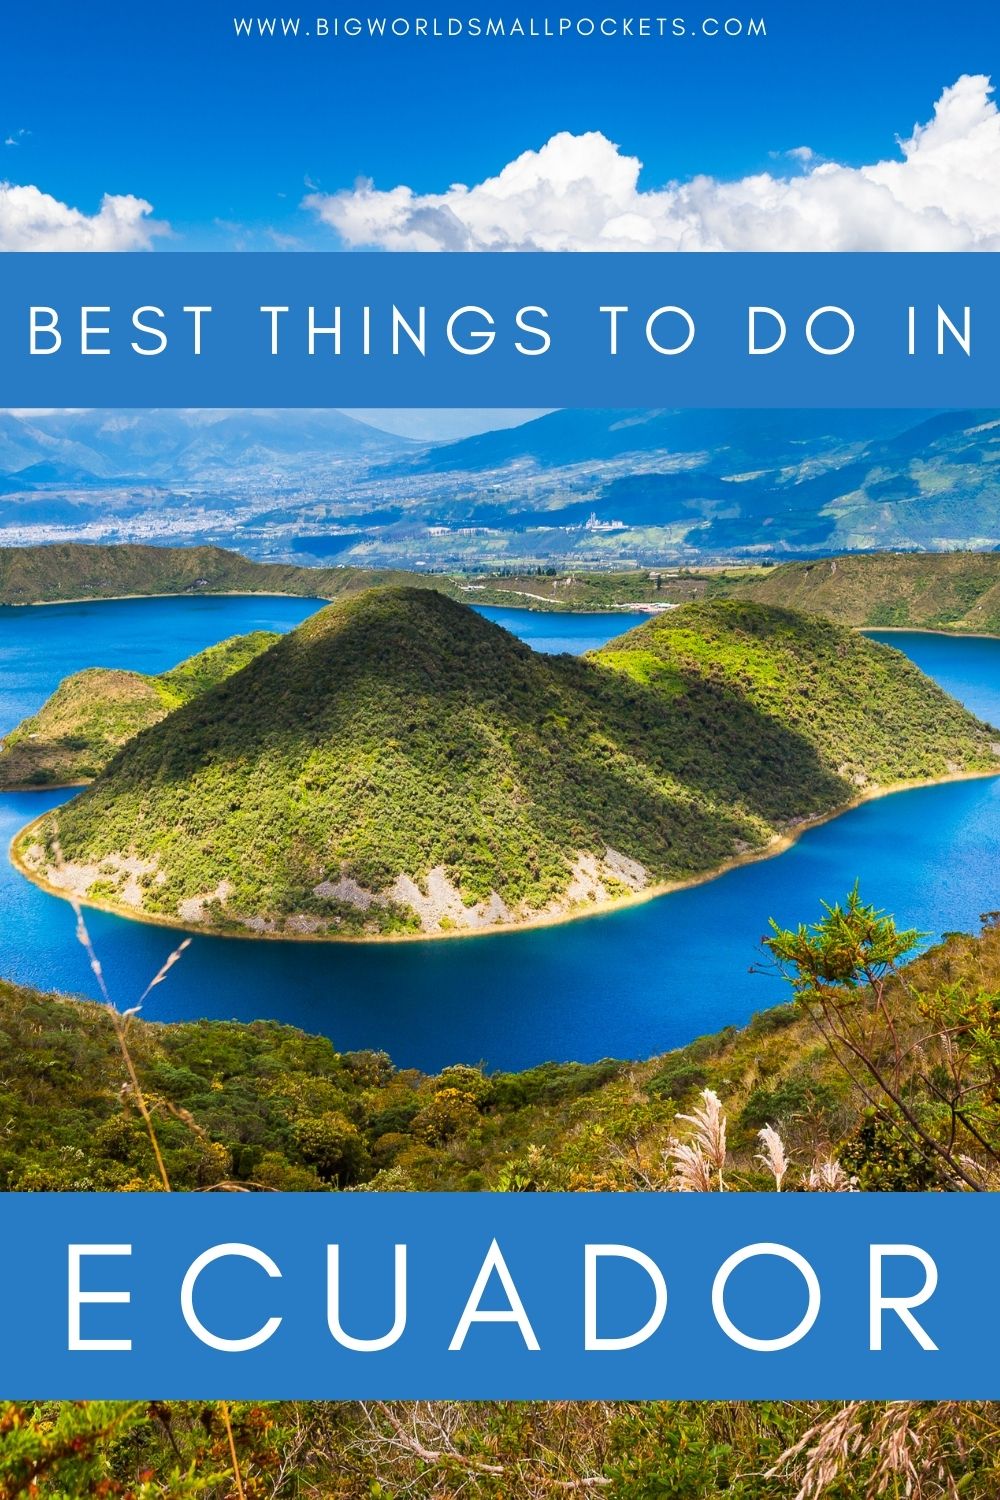 The Top Things to Do in Ecuador